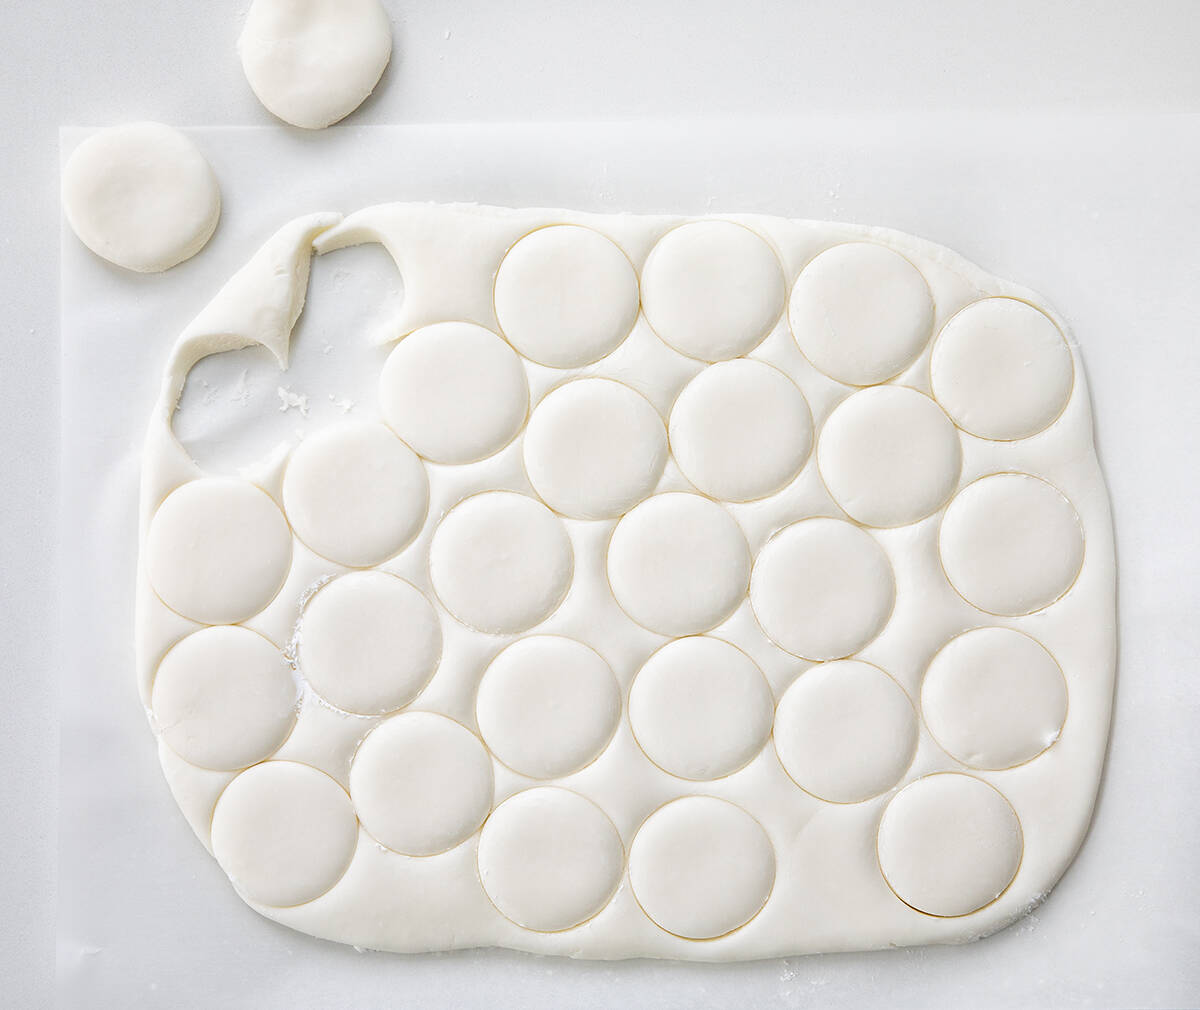 Image showing cut out circles for how to Make mint filling for Homemade Peppermint Patties.